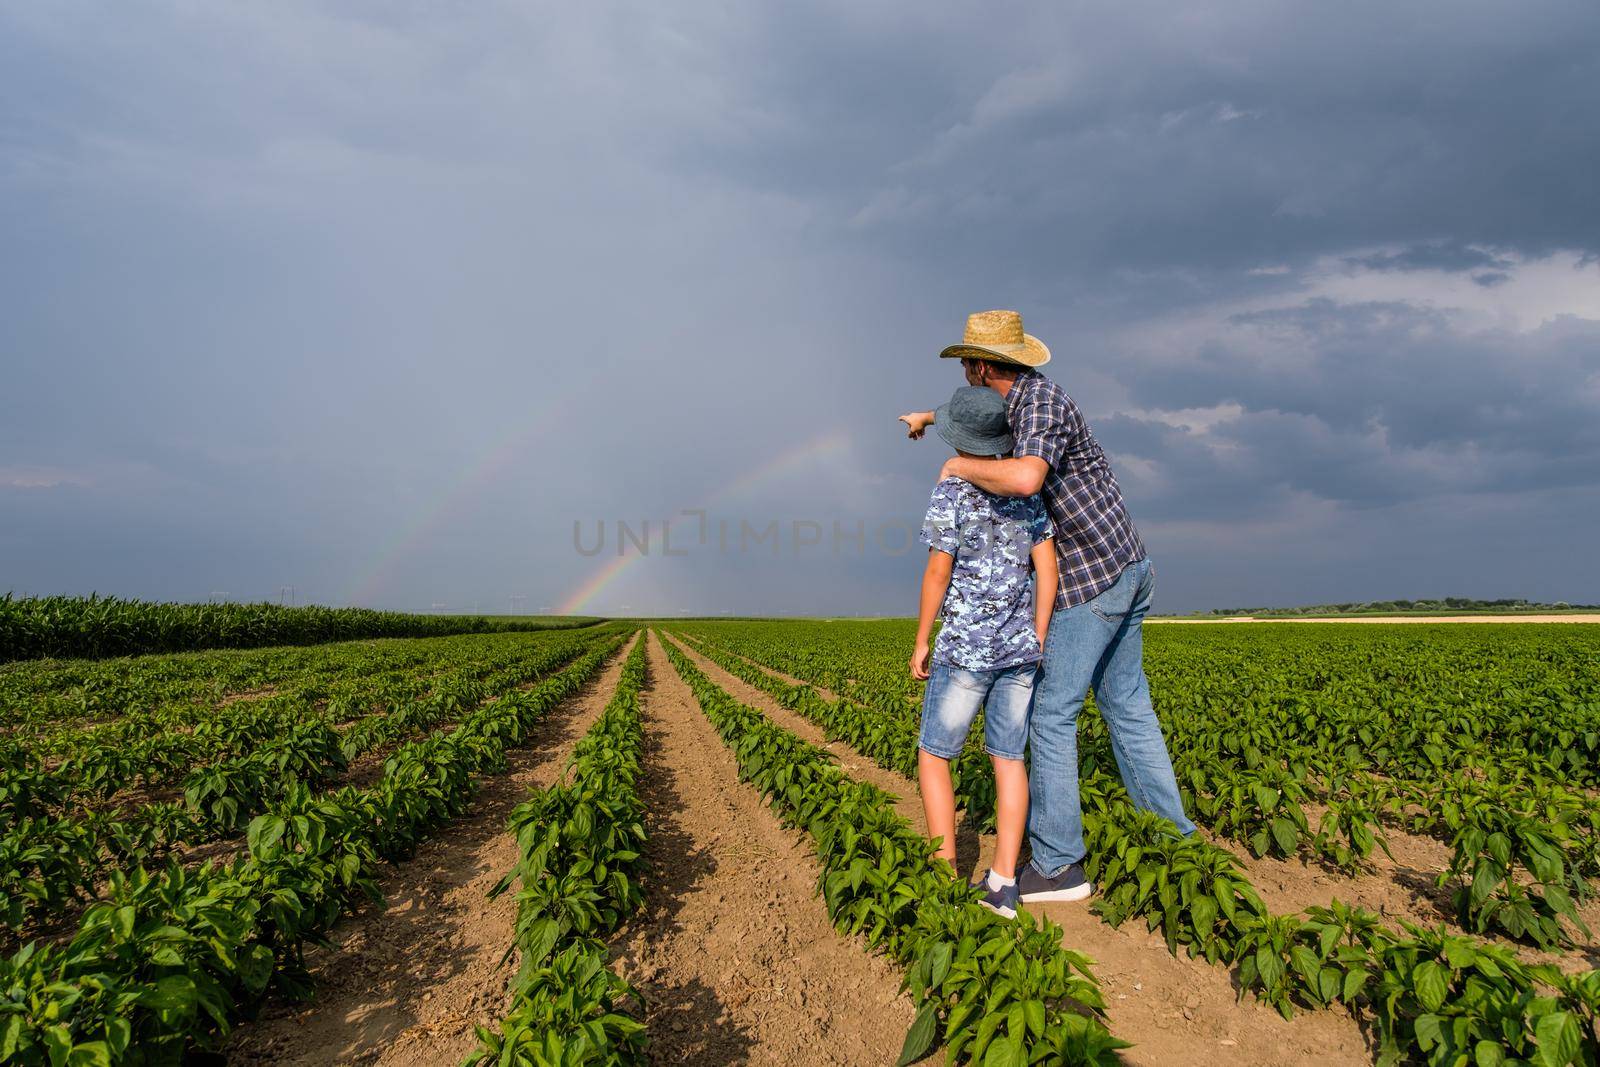 Father is teaching his son about cultivating chili. Chili plantation successfully sown. Farmers in agricultural field looking at rainbow.